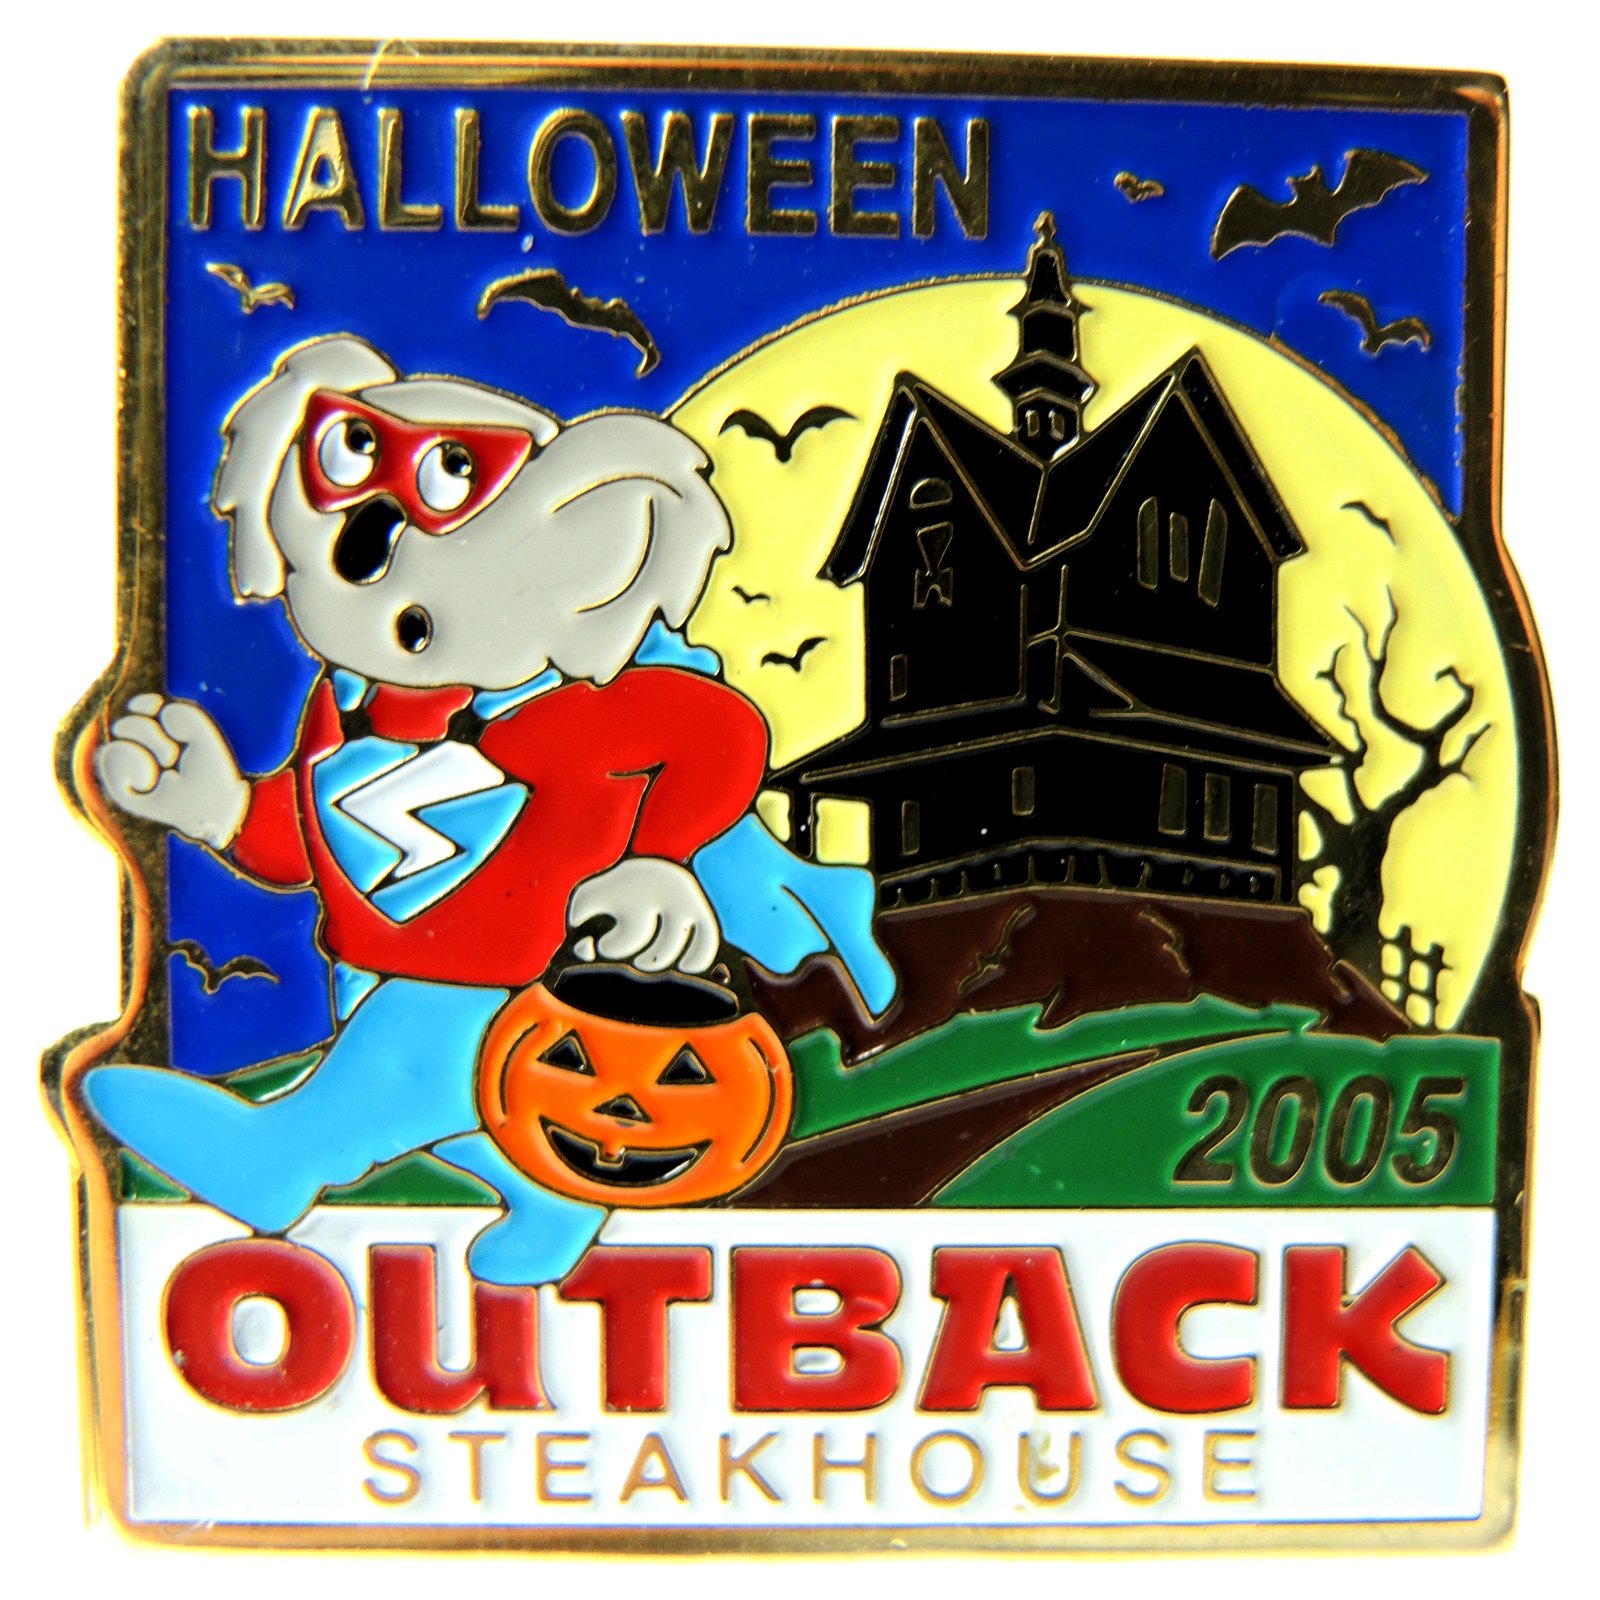 Details about   OUTBACK STEAKHOUSE PIN HALLOWEEN 2009 